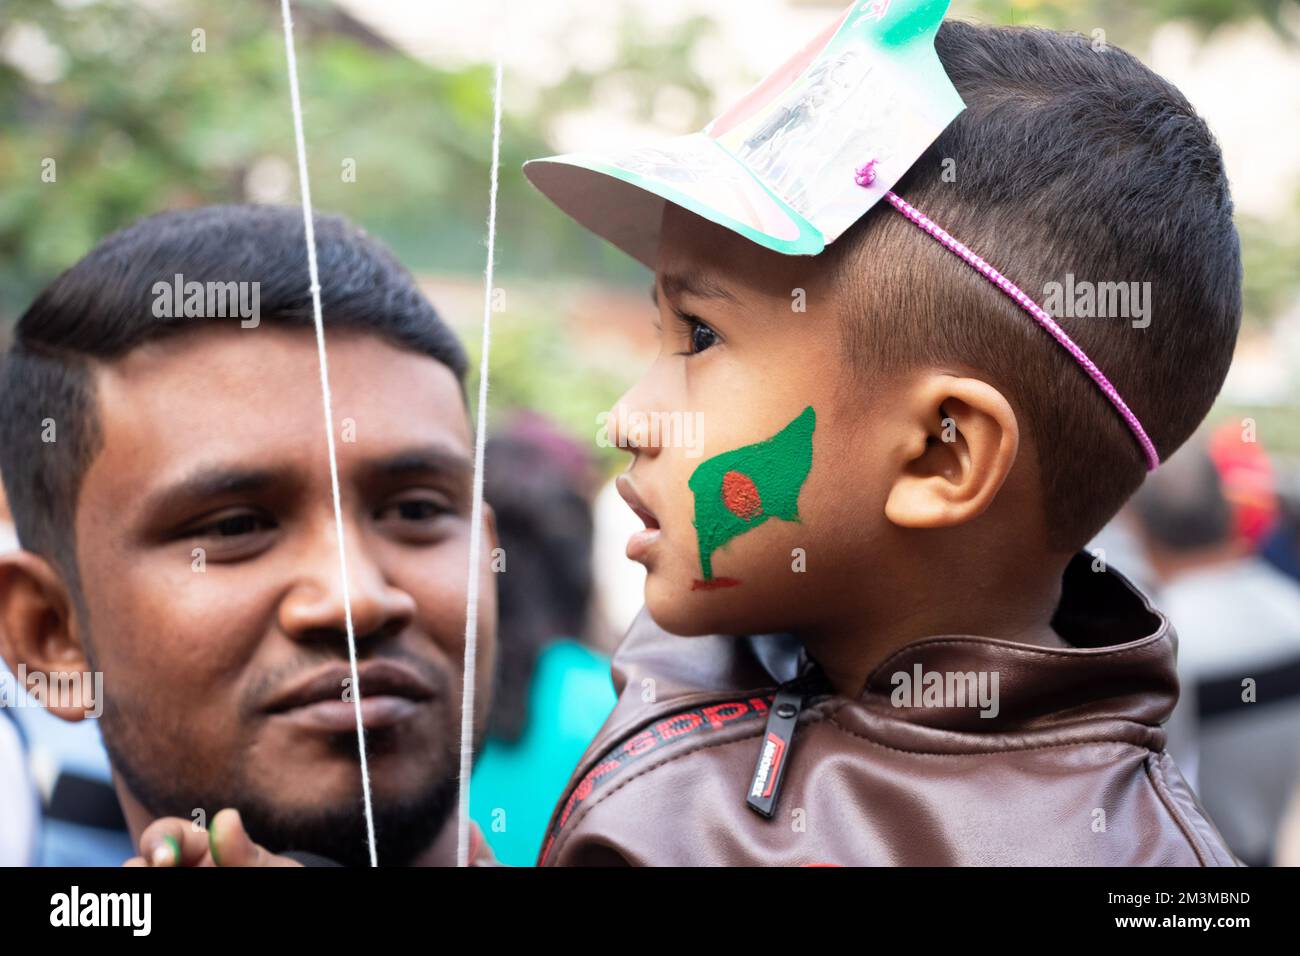 Narayanganj, Dhaka, Bangladesh. 16th Dec, 2022. A Bangladeshi child with a national flag painted on the face to celebrate the 52nd Victory Day, which marks the end of a bitter nine-month war of independence from Pakistan, in Narayanganj, Bangladesh. Bangladesh is celebrating the 52nd anniversary of its national victory, remembering the valiant freedom fighters who fought and made the ultimate sacrifice to free the country from the Pakistani forces. People from all walks of life gather at the Narayanganj Central Shaheed Minar in the morning to mark the most precious day of the Bangali people Cr Stock Photo